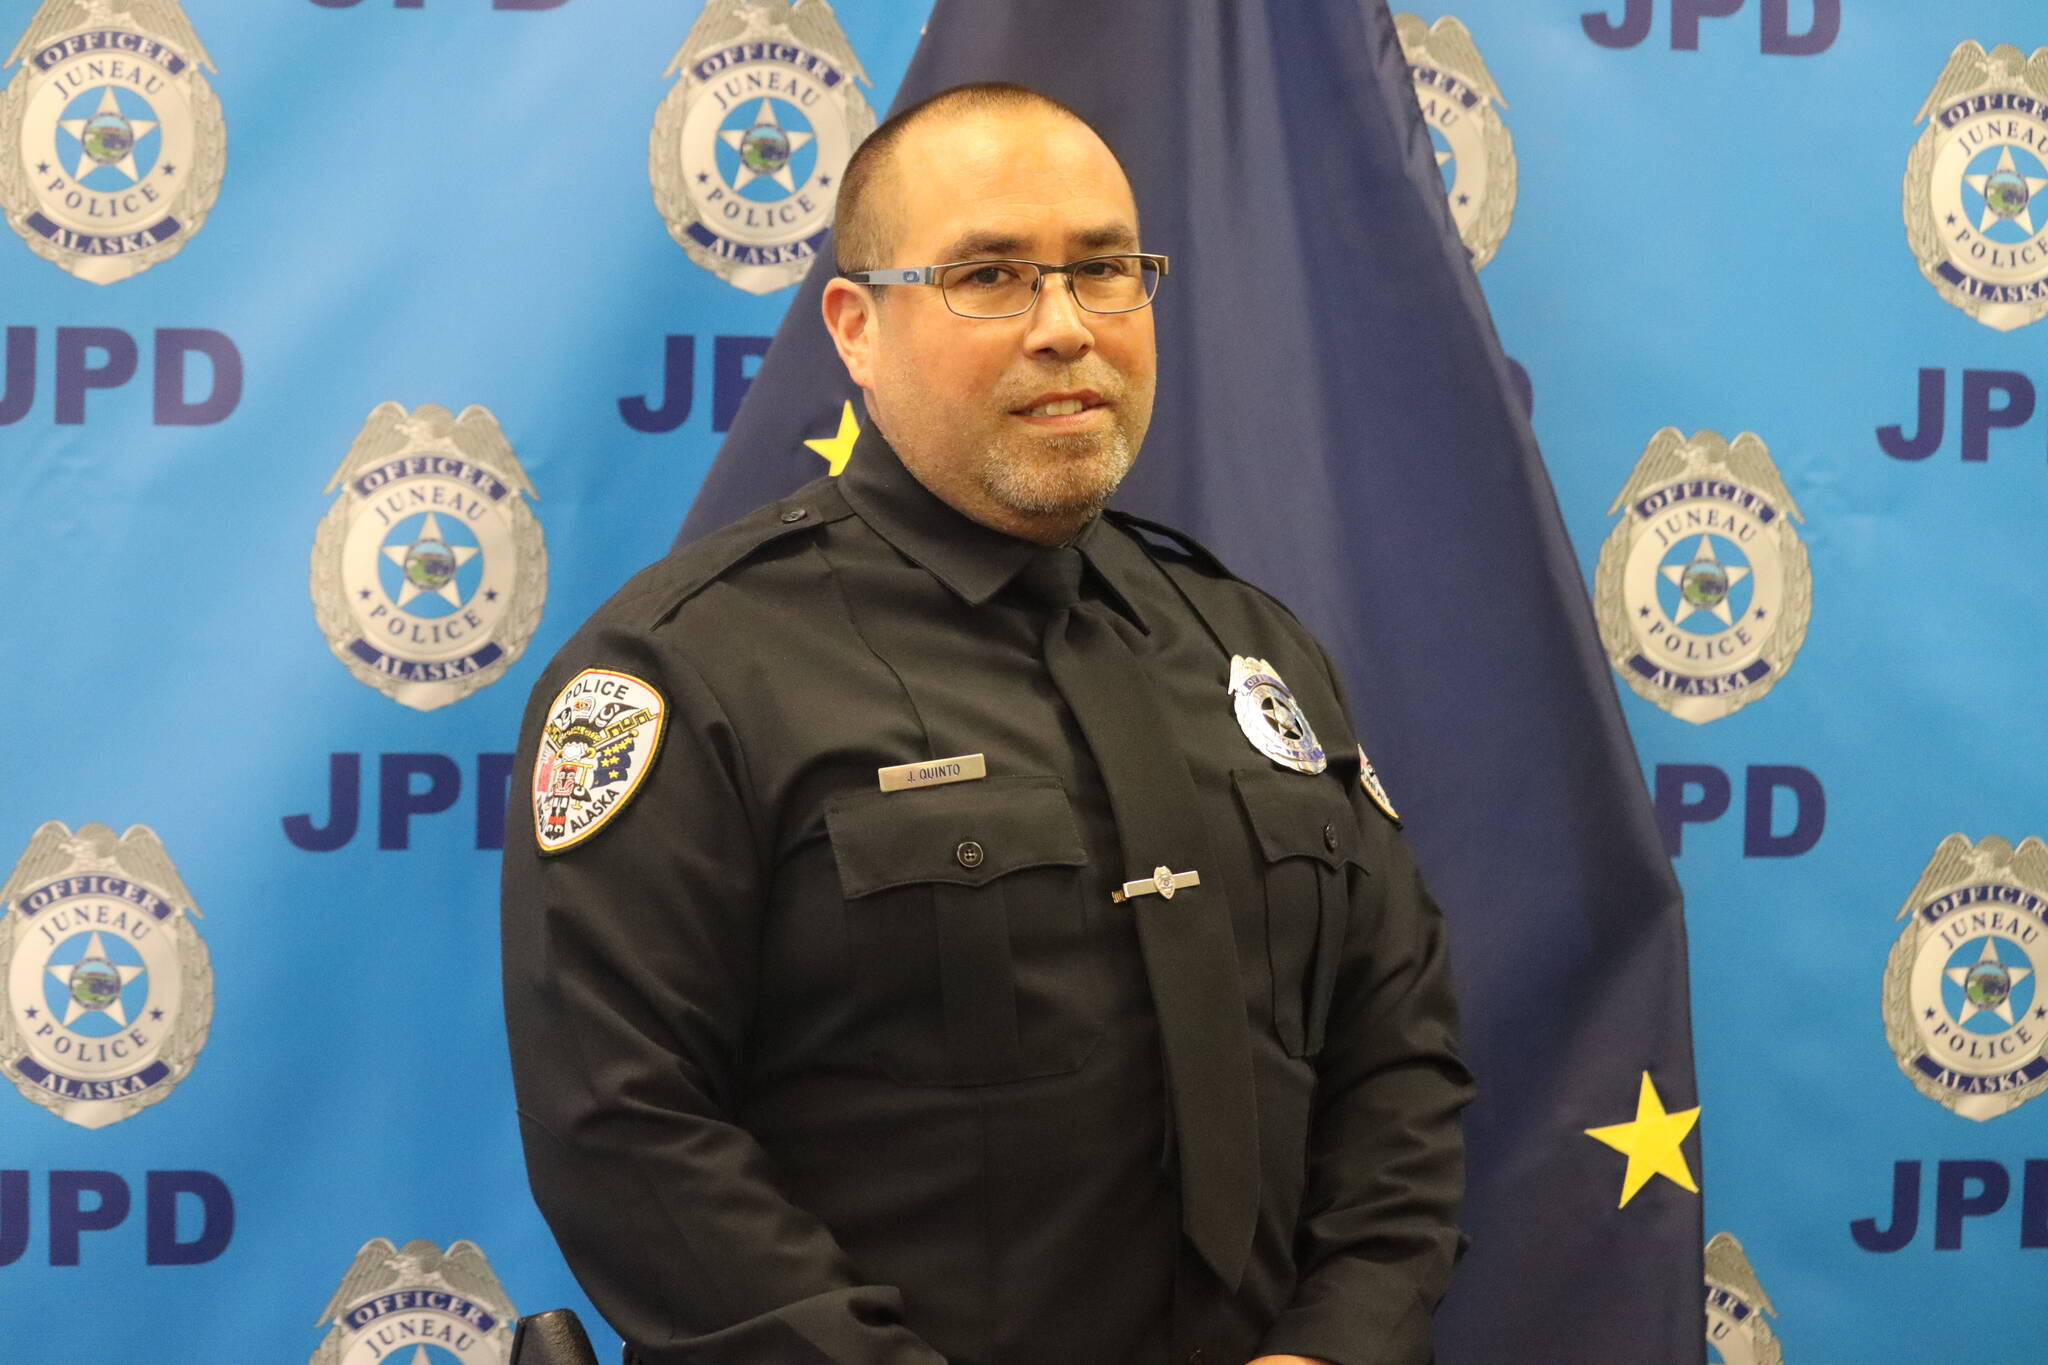 Jonson Kuhn / Juneau Empire 
Officer Jim Quinto stands for a photo on Friday at his retirement ceremony at the Juneau Police Department surrounded by family, friends and colleagues. Quinto started his career with JPD on September 2, 1997, exactly 25 years from the day of the ceremony.